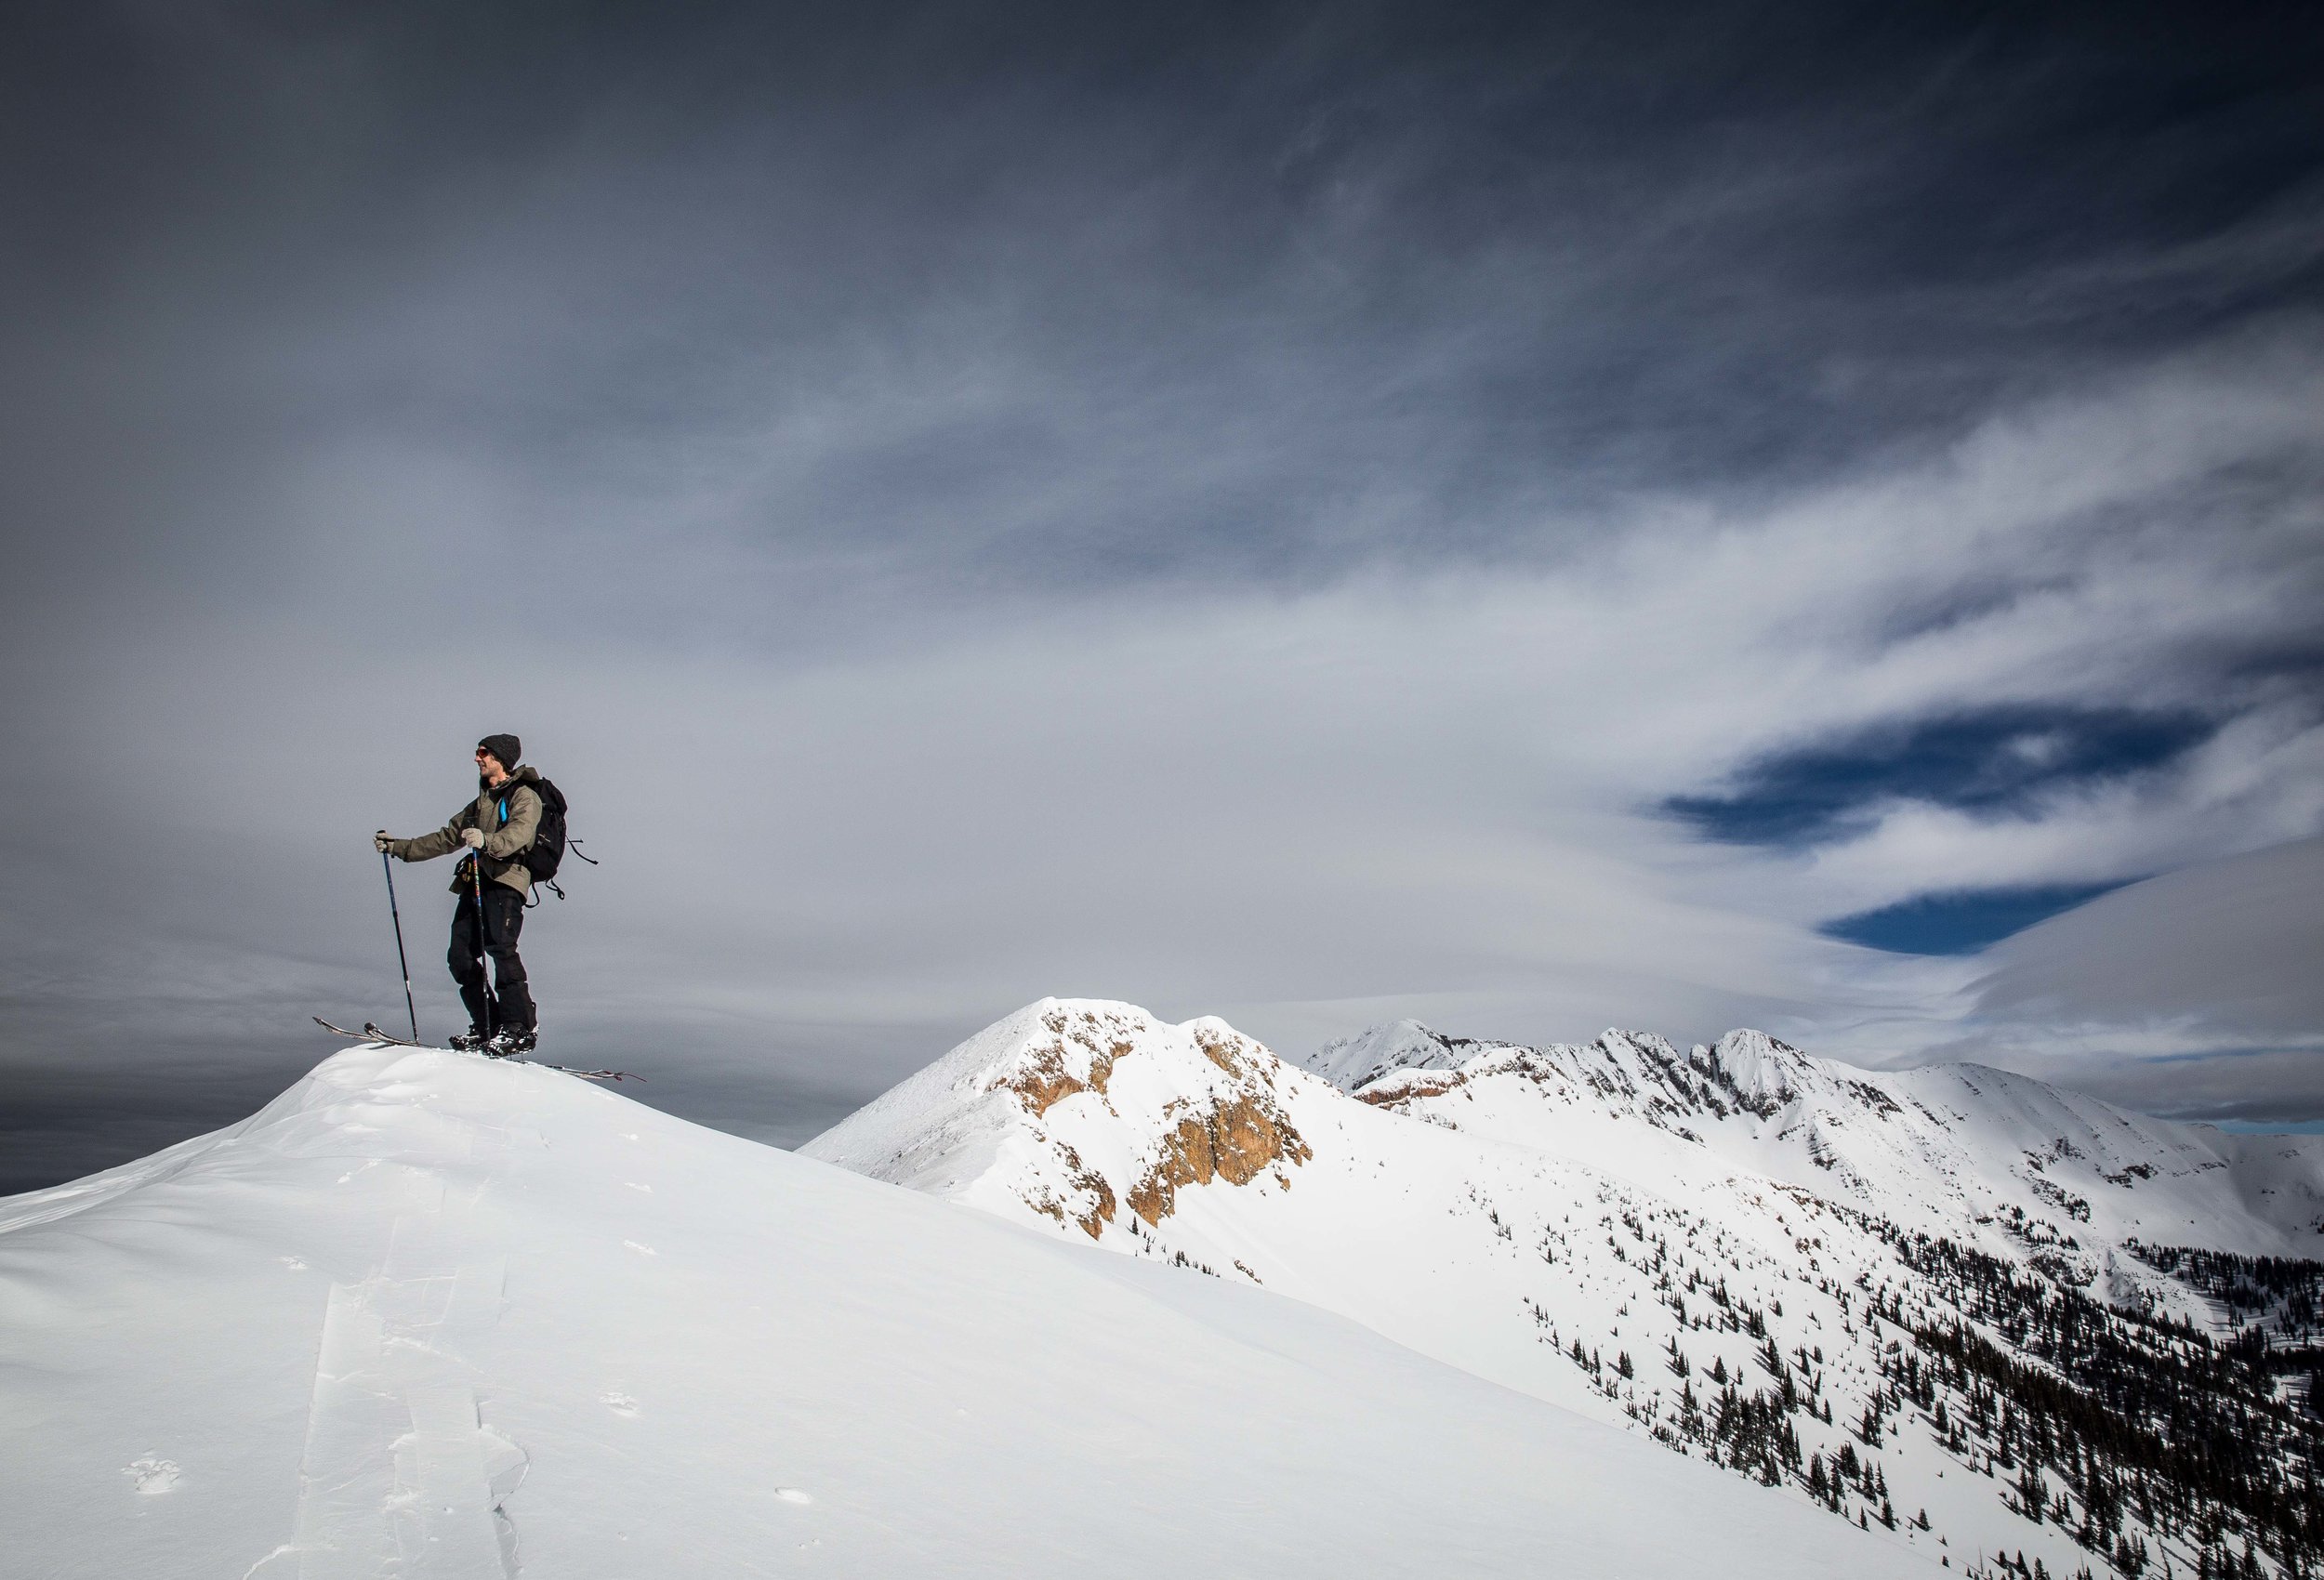 Telluride Adventure Photography - Backcountry